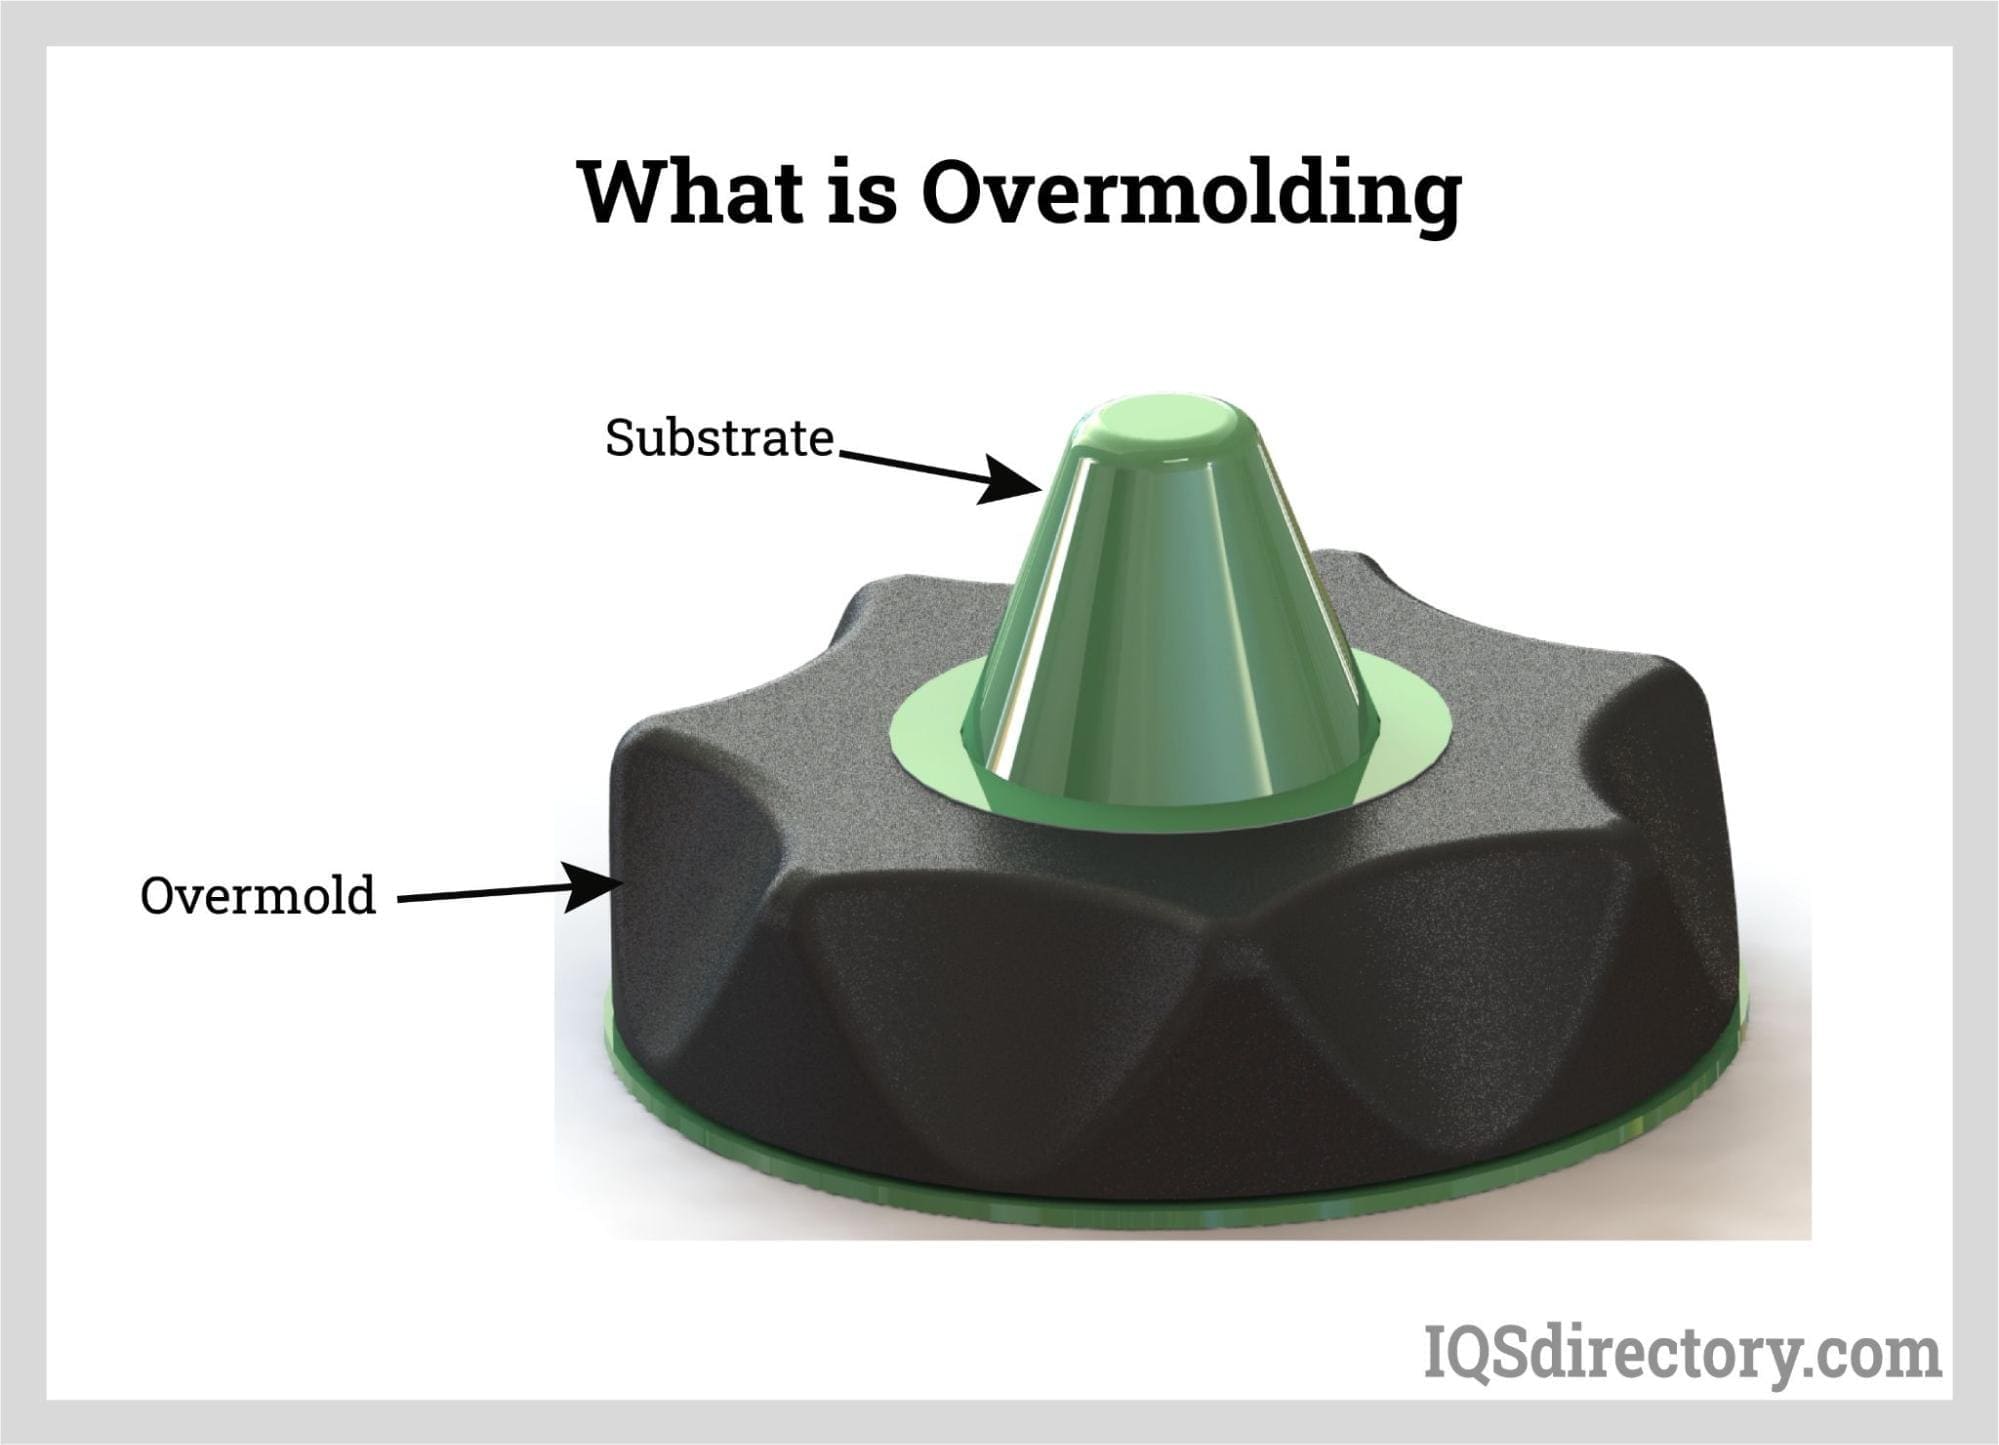 https://www.iqsdirectory.com/articles/plastic-injection-molding/plastic-overmolding/what-is-overmolding.jpg